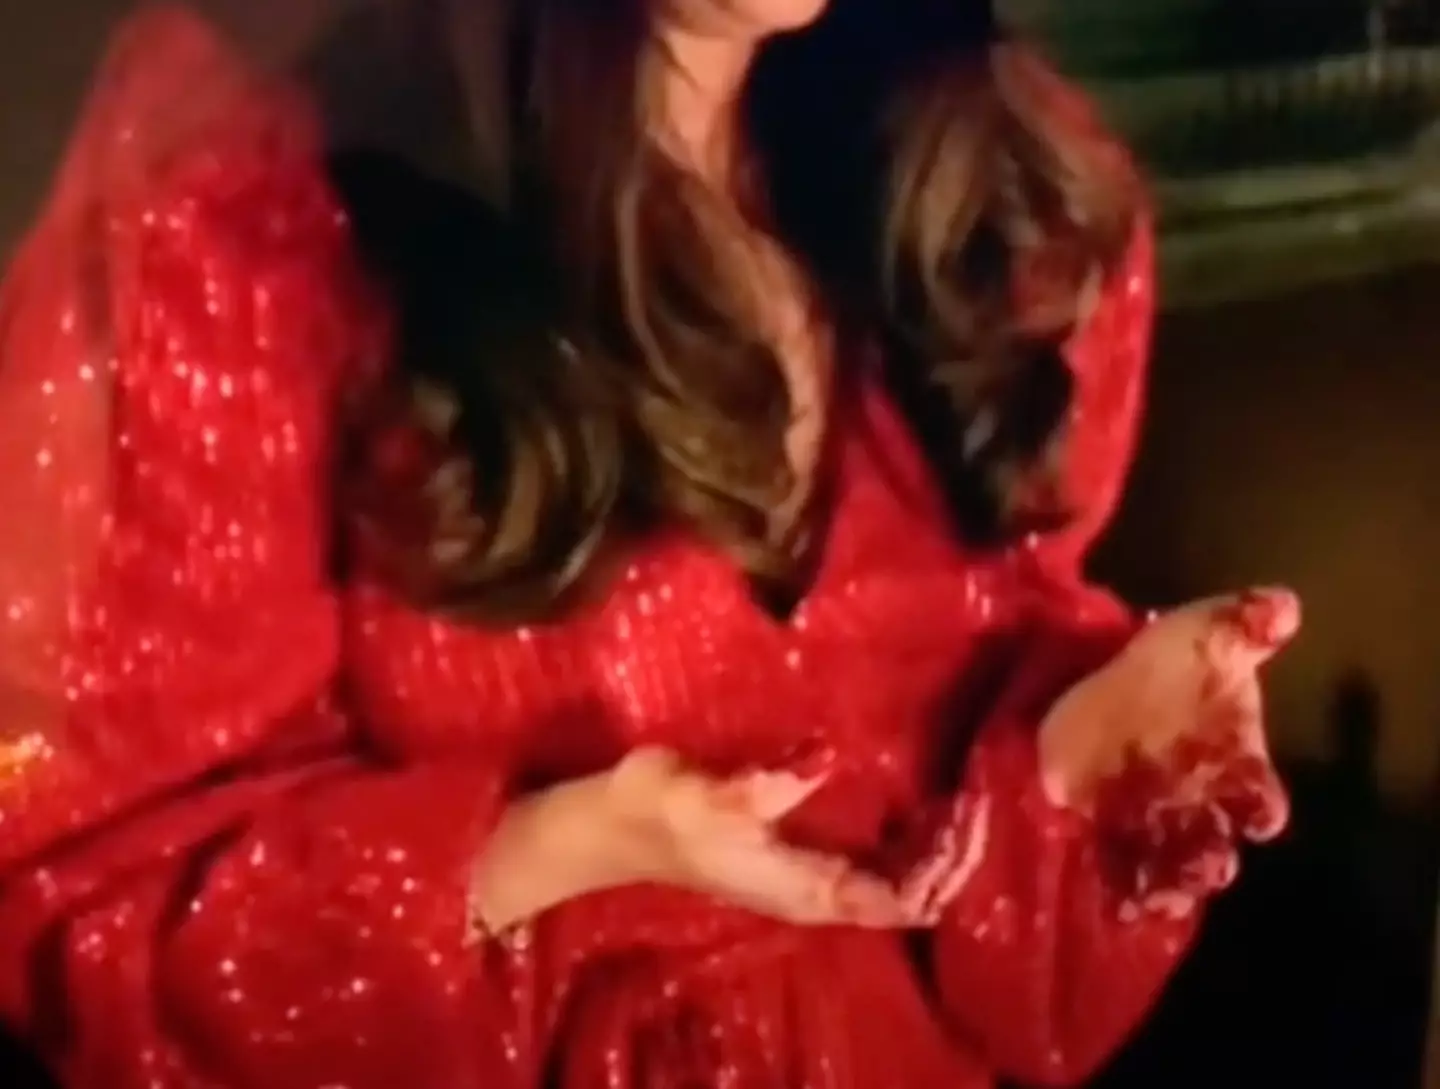 Stacey had blood on her hands in the Christmas clip.